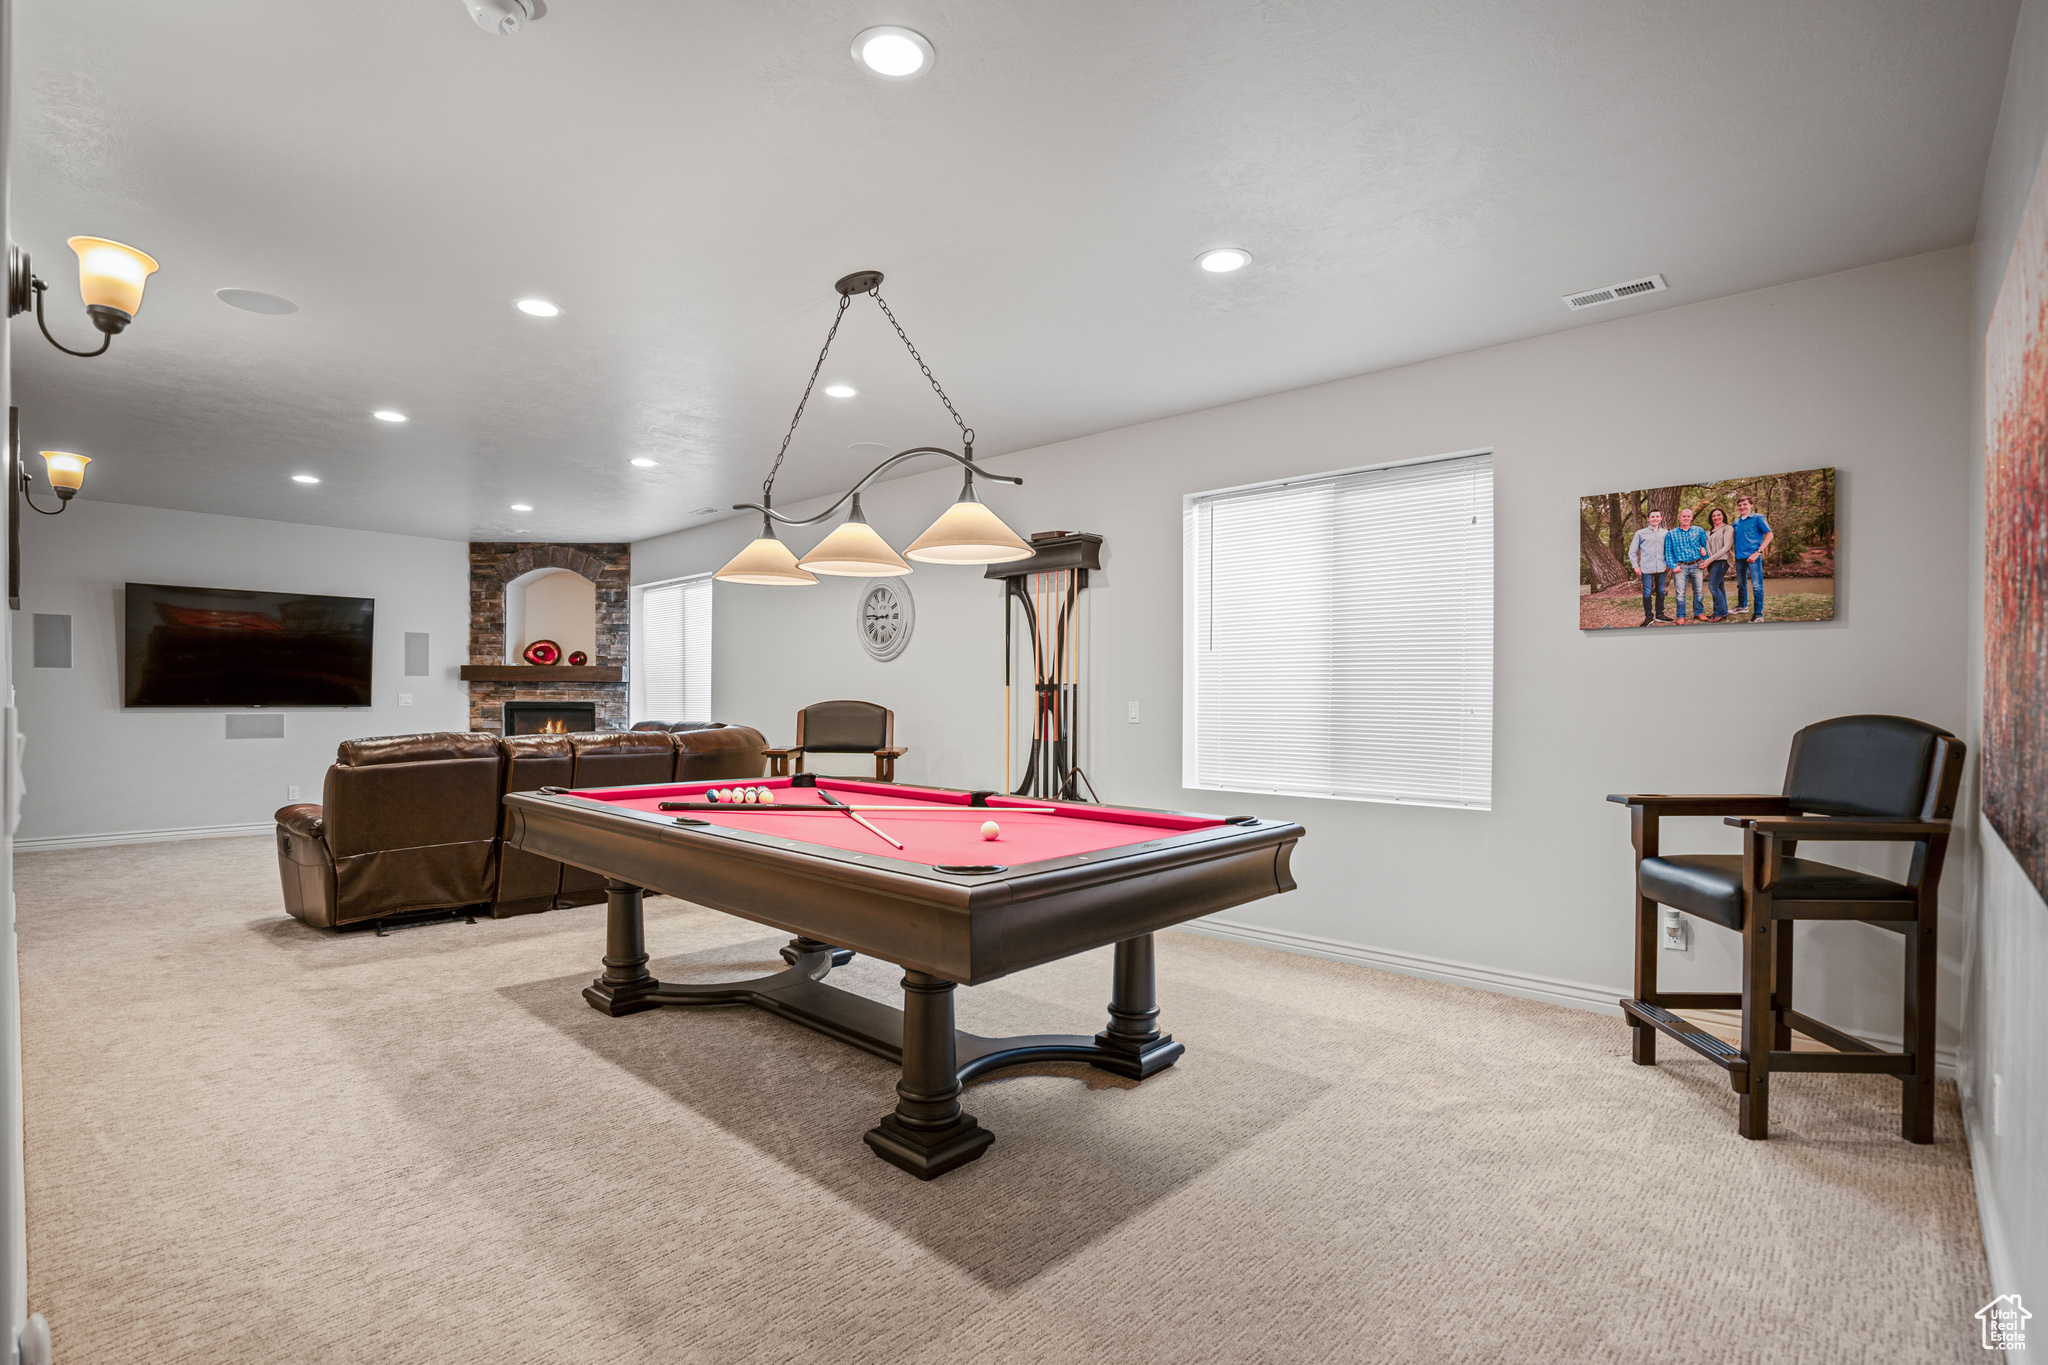 Playroom featuring light carpet, brick wall, a fireplace, and pool table